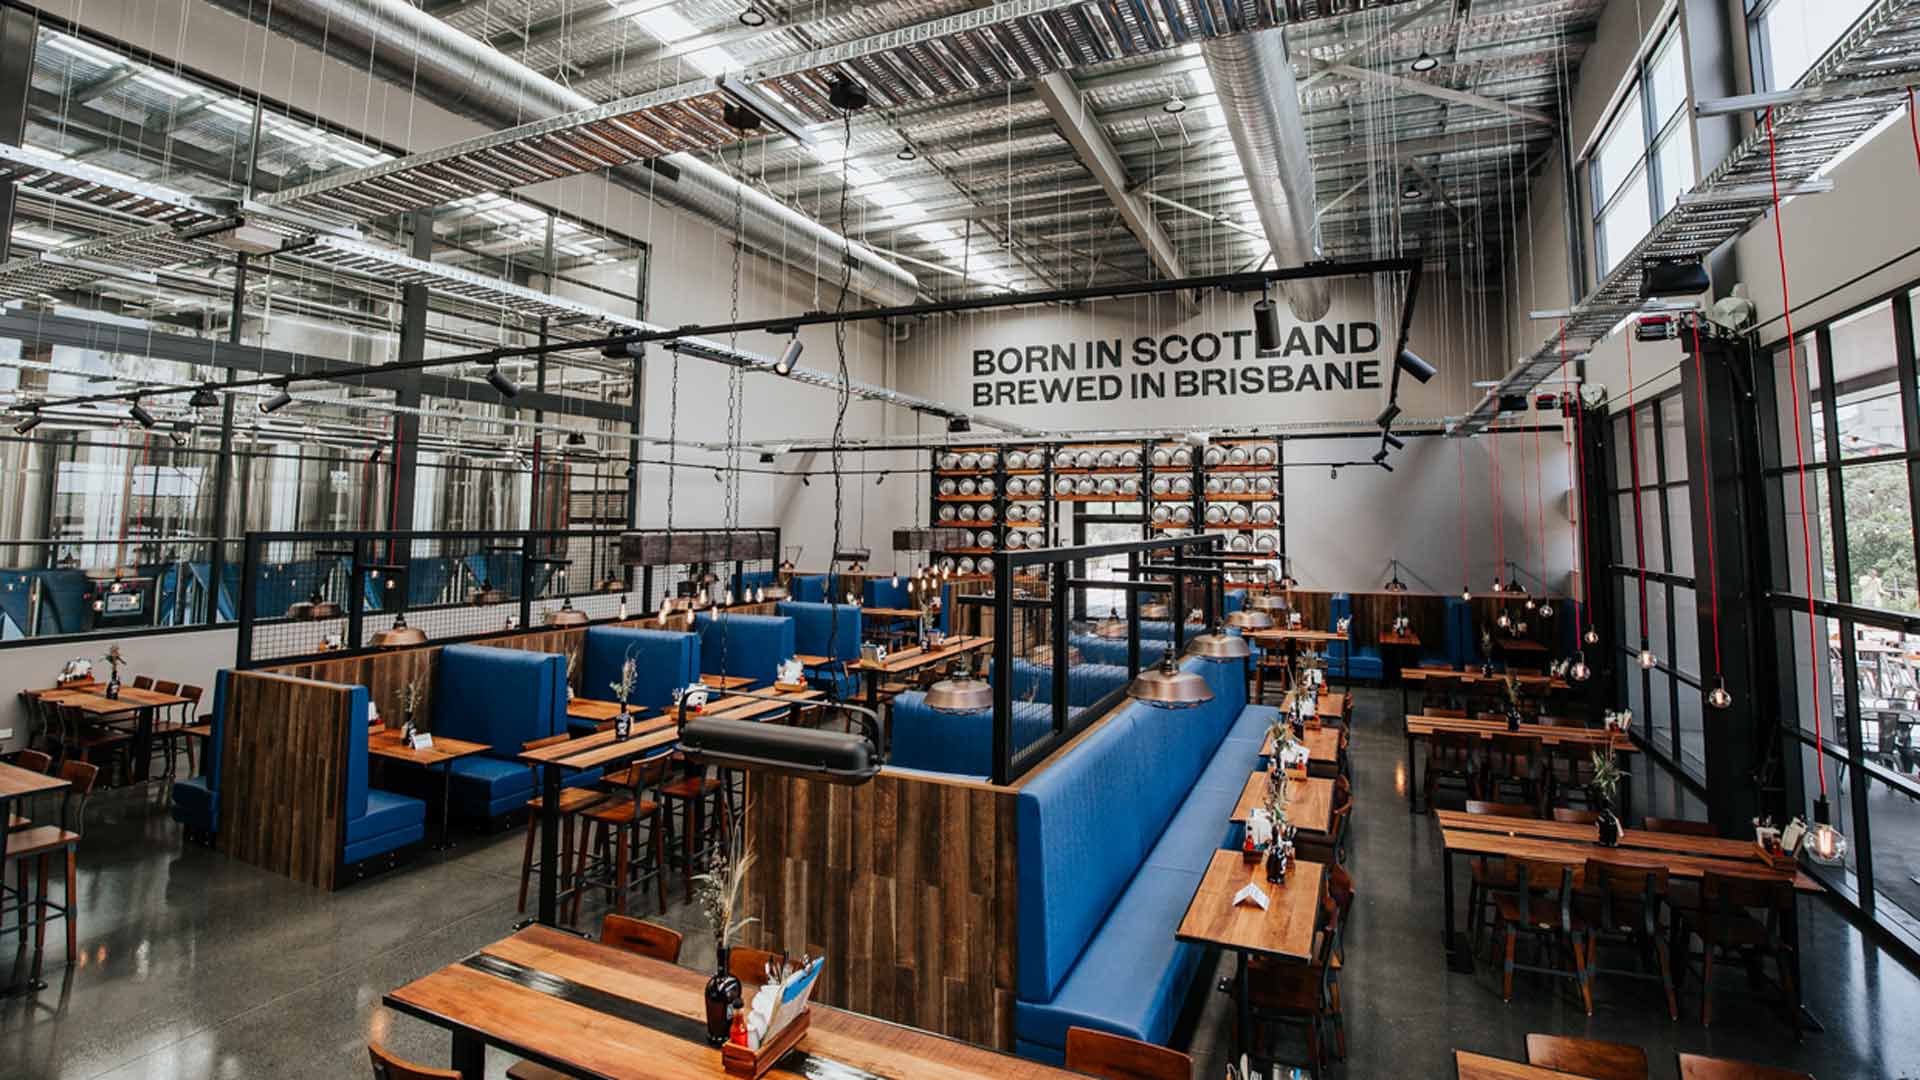 Scotland's BrewDog Has Opened Its First Australian Brewery and Taproom in Brisbane